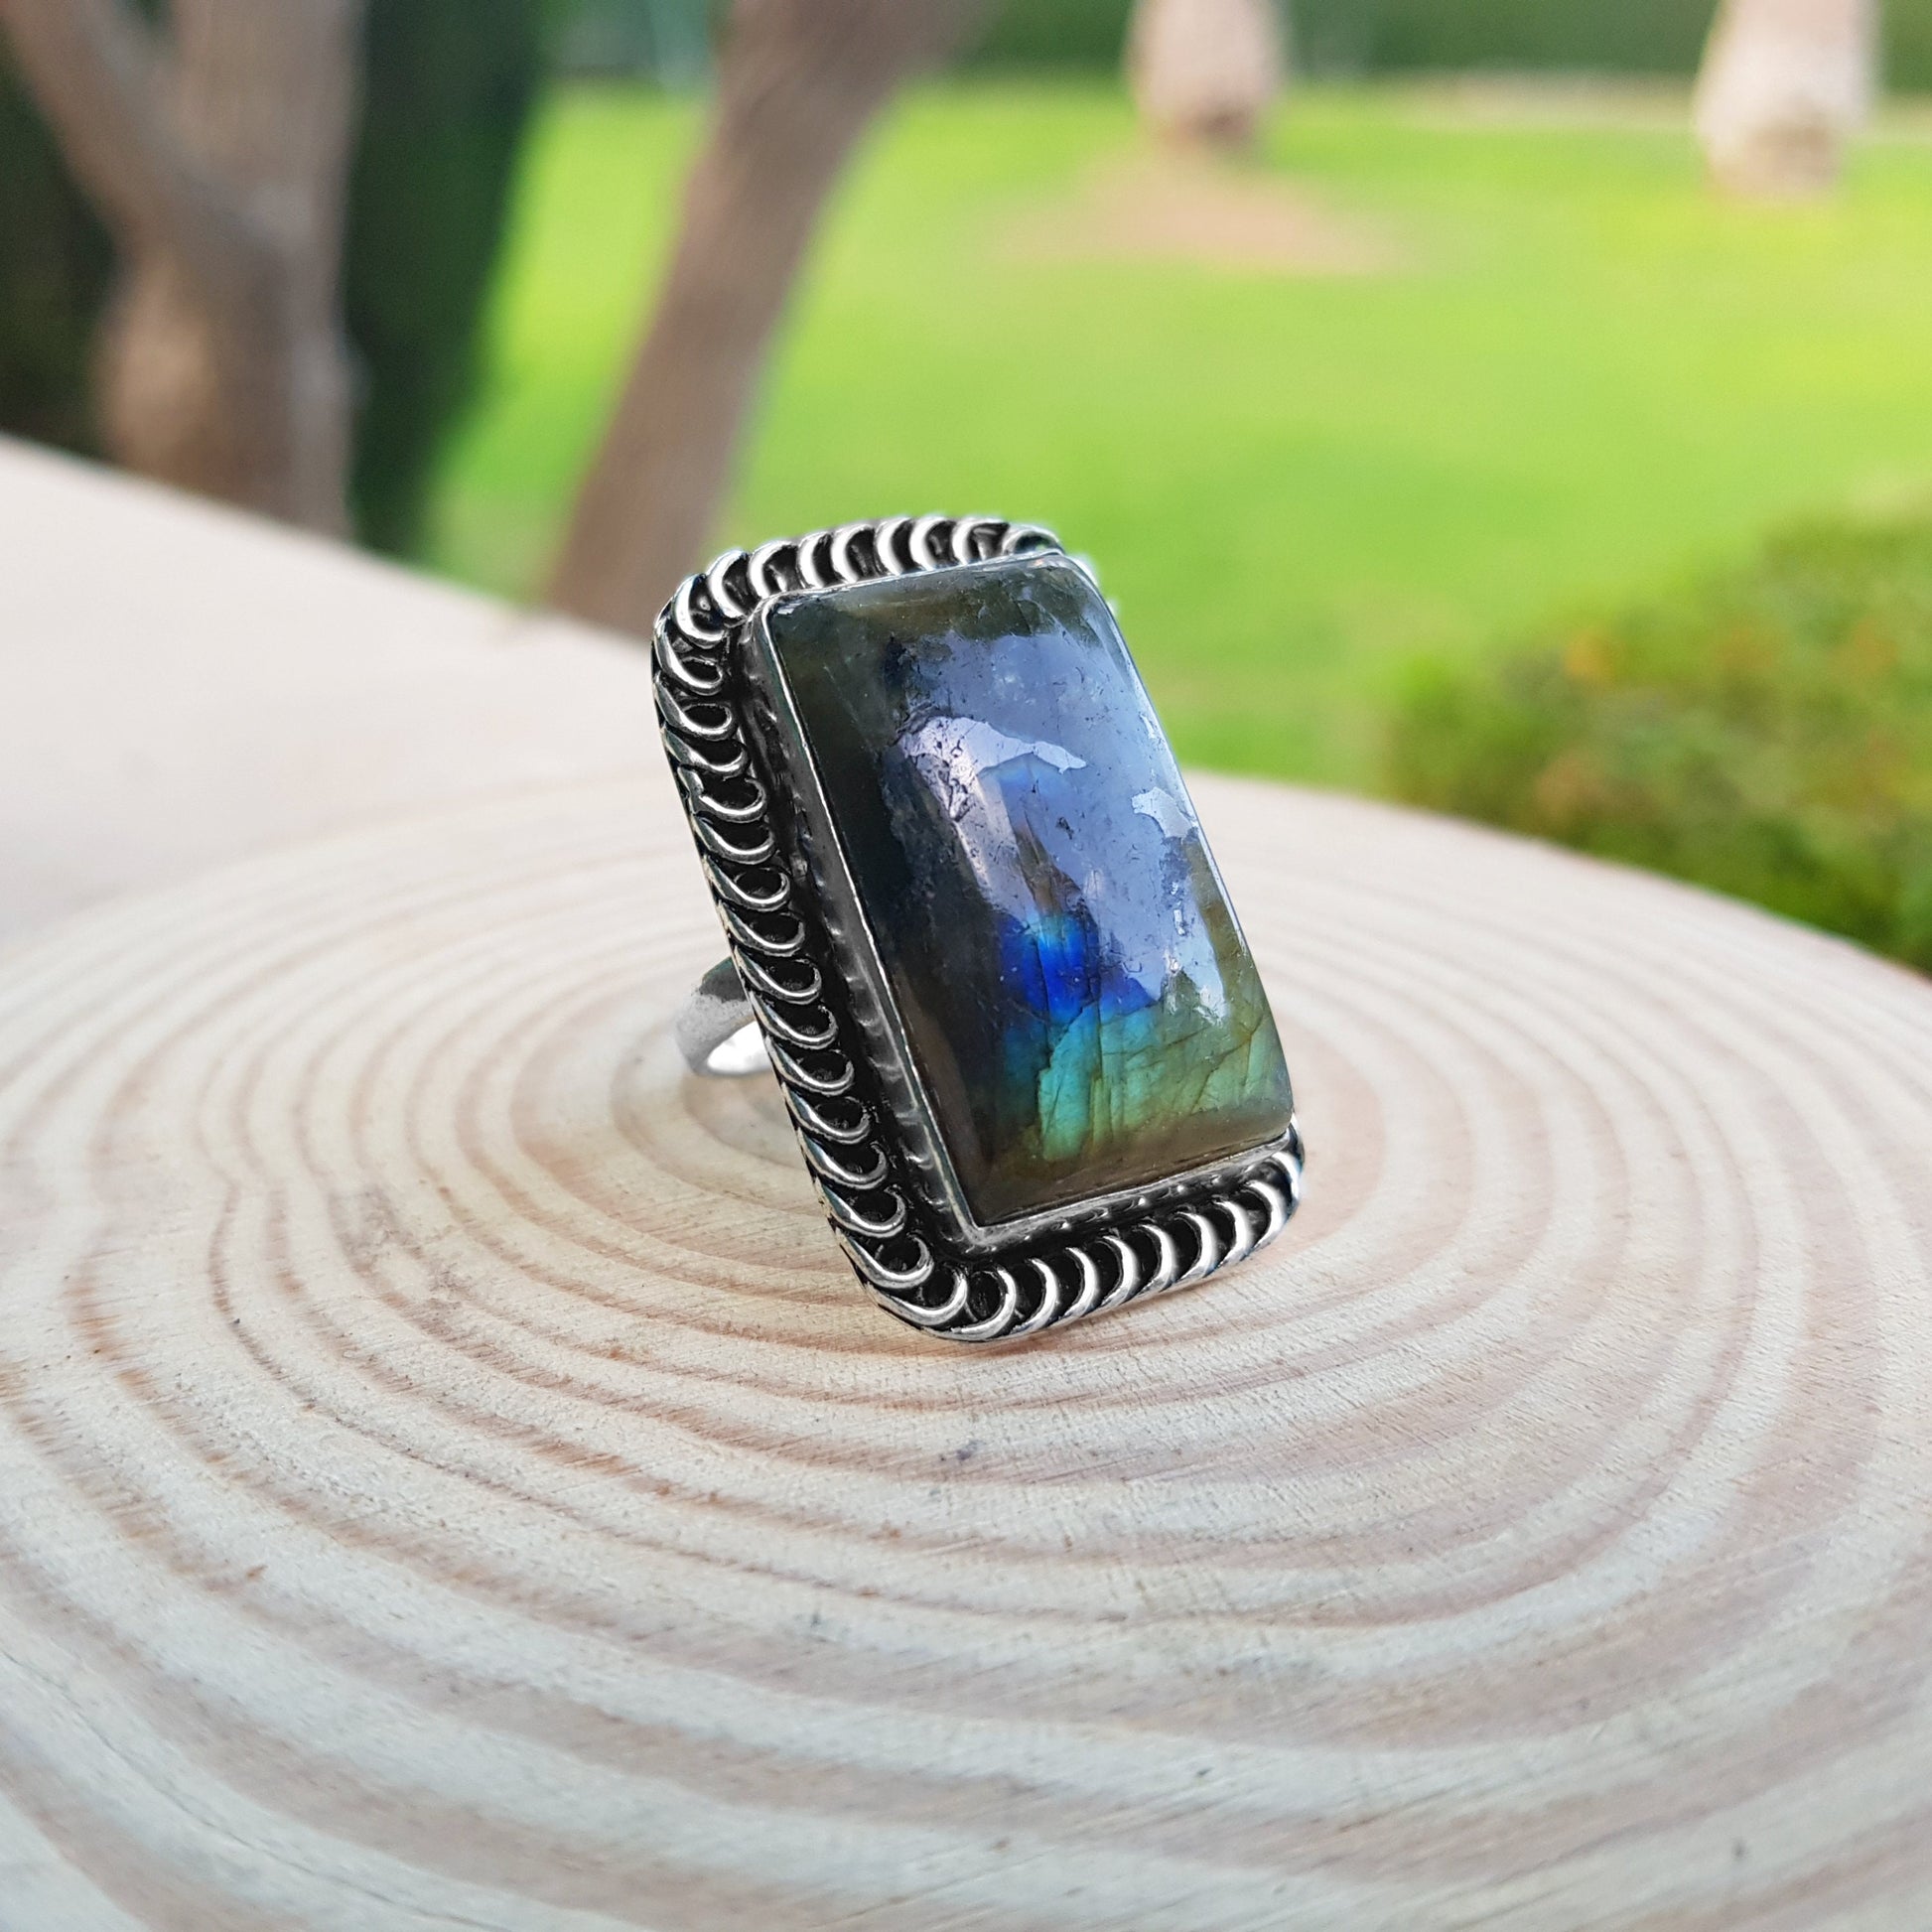 Labradorite Ring In Sterling Silver Size US 7 3/4 Boho Crystal Ring Unique Gift For Women GypsyJewelry